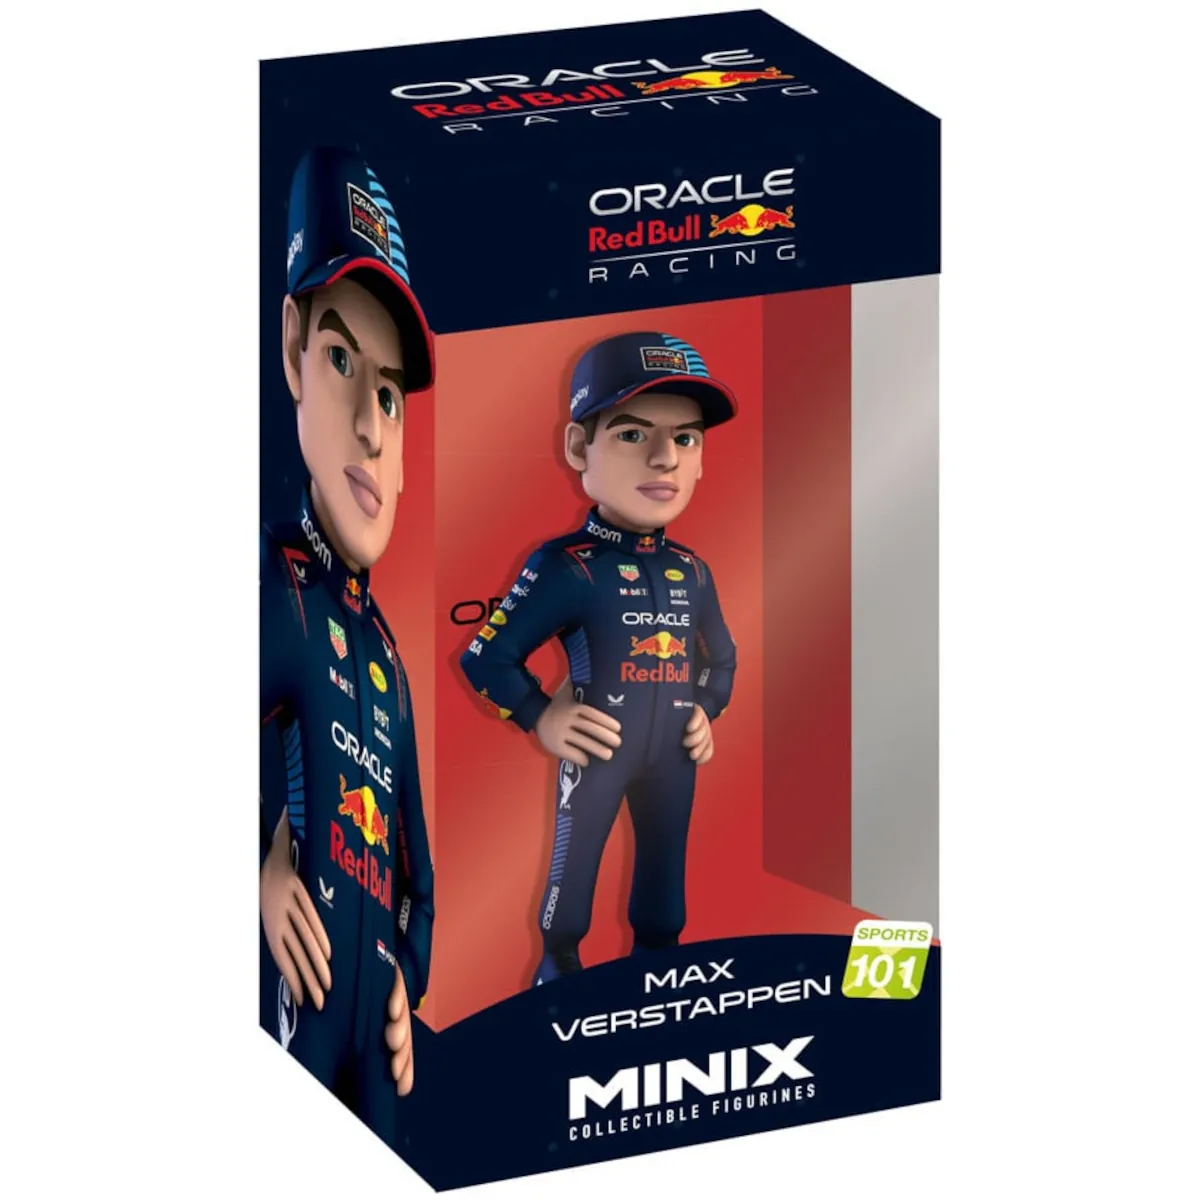 MN15283 Max Verstappen 'Oracle Red Bull Racing' (Formula 1) 12cm MINIX Collectable Figure 2